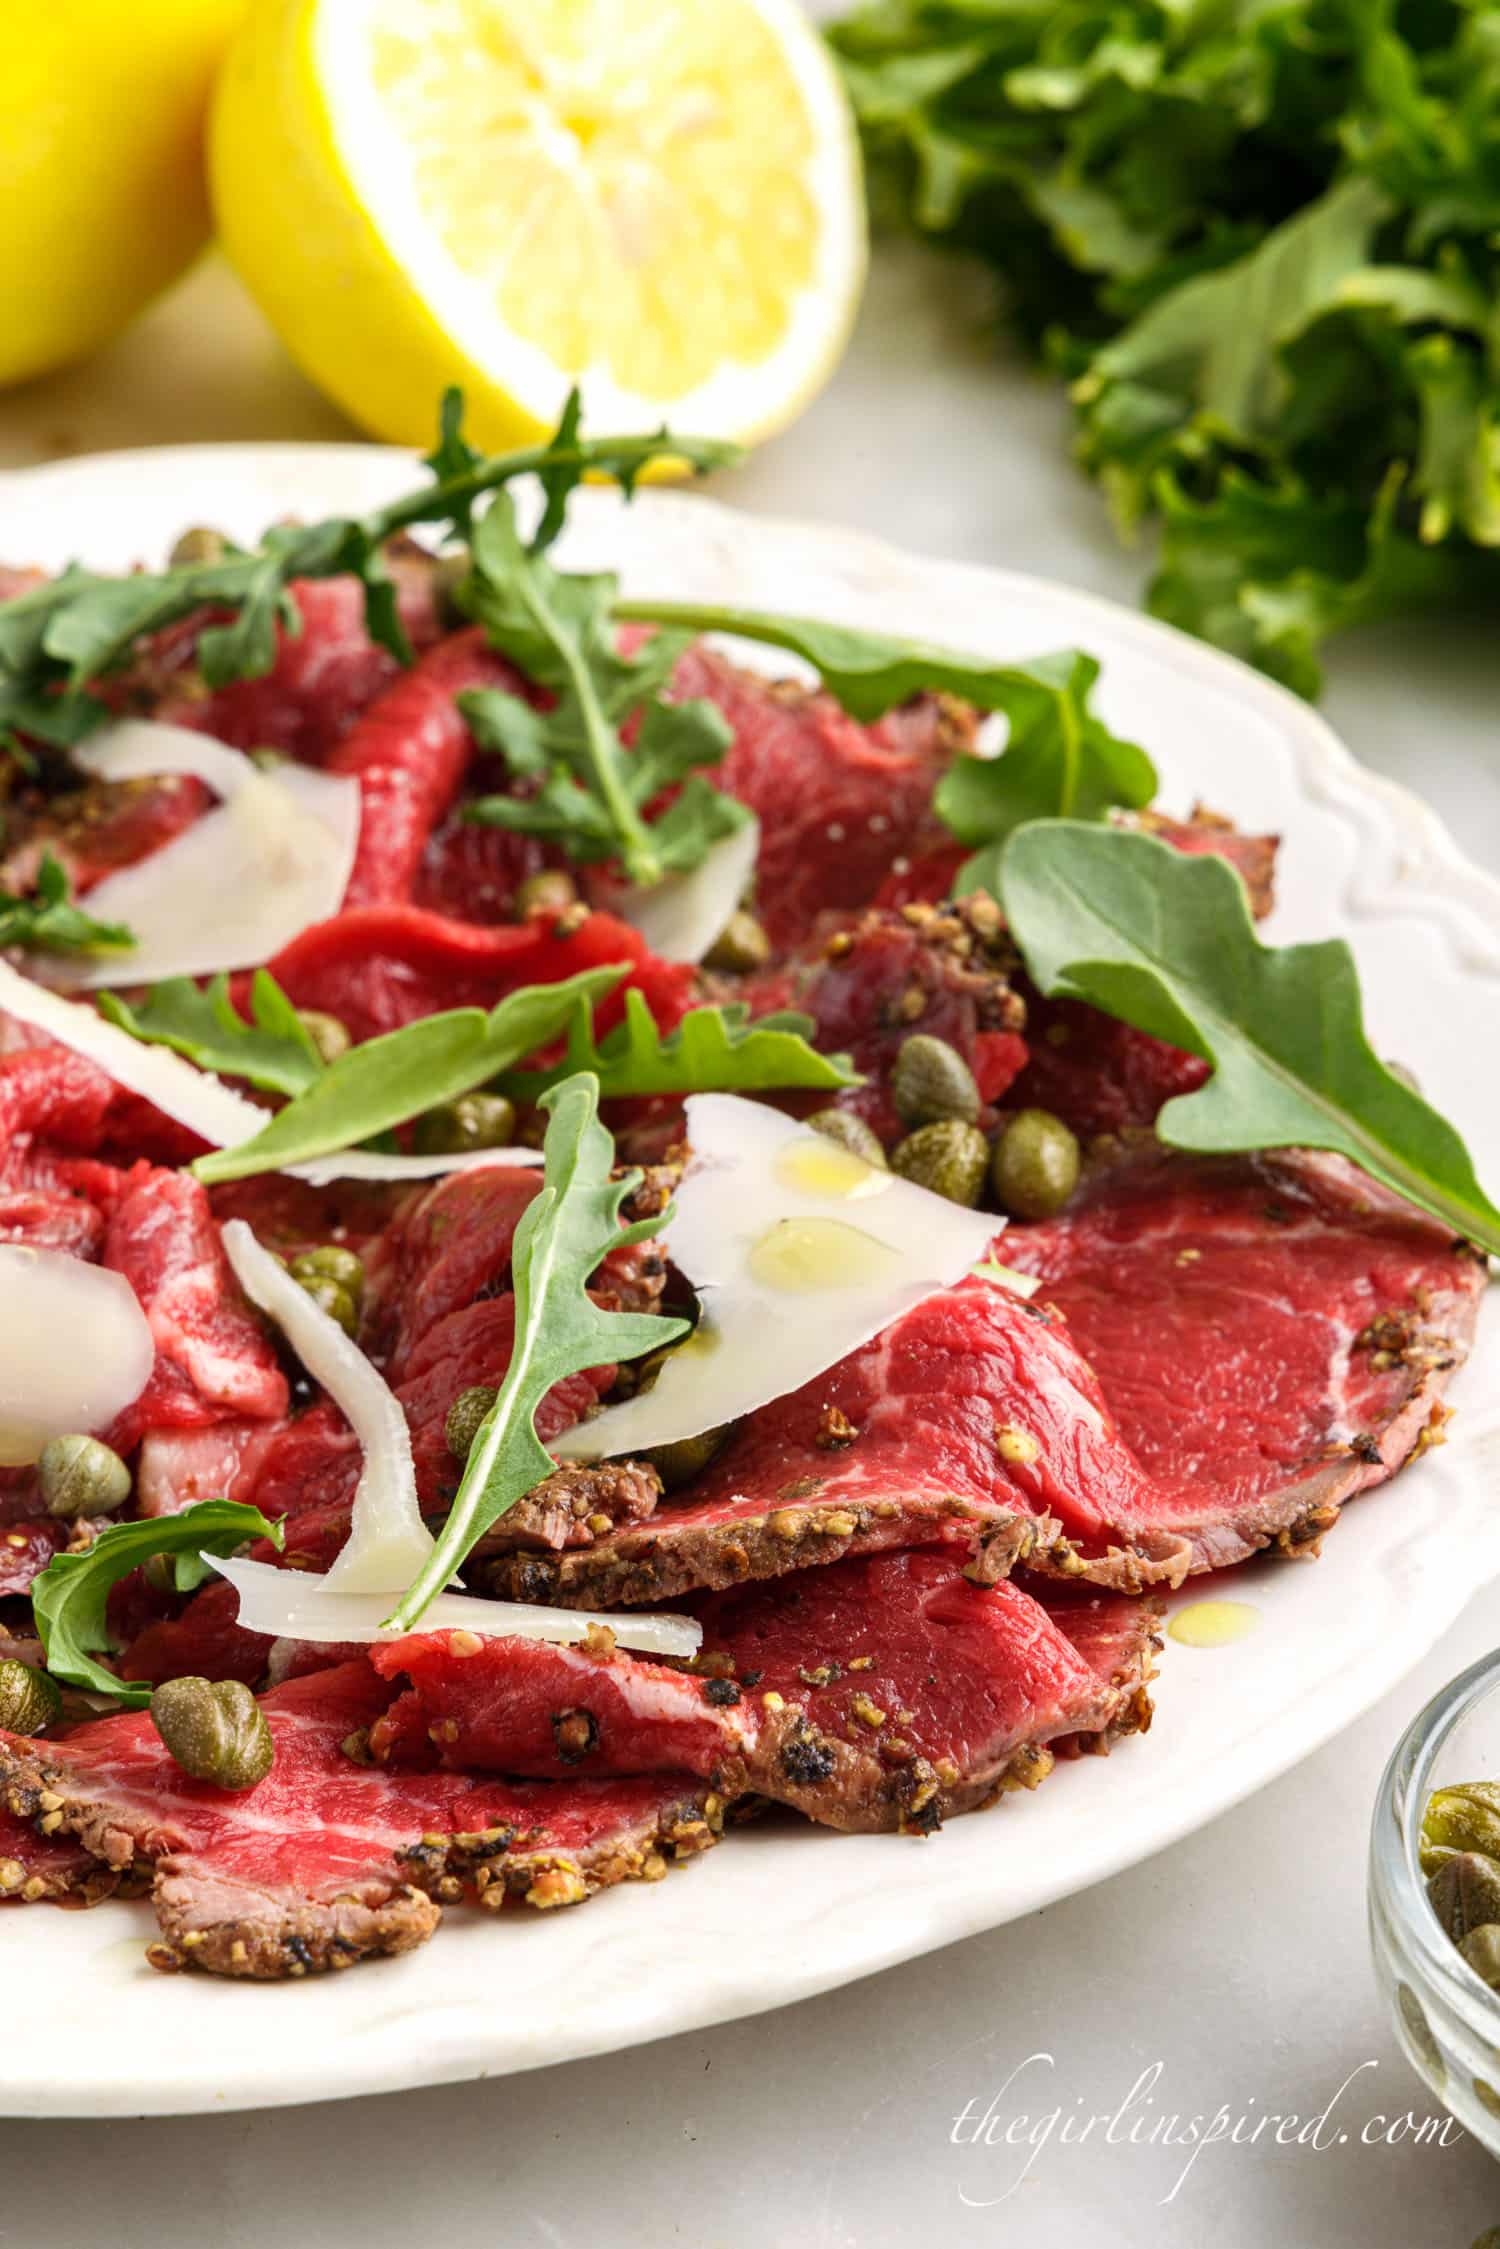 Front view of a plate of Beef Carpaccio.